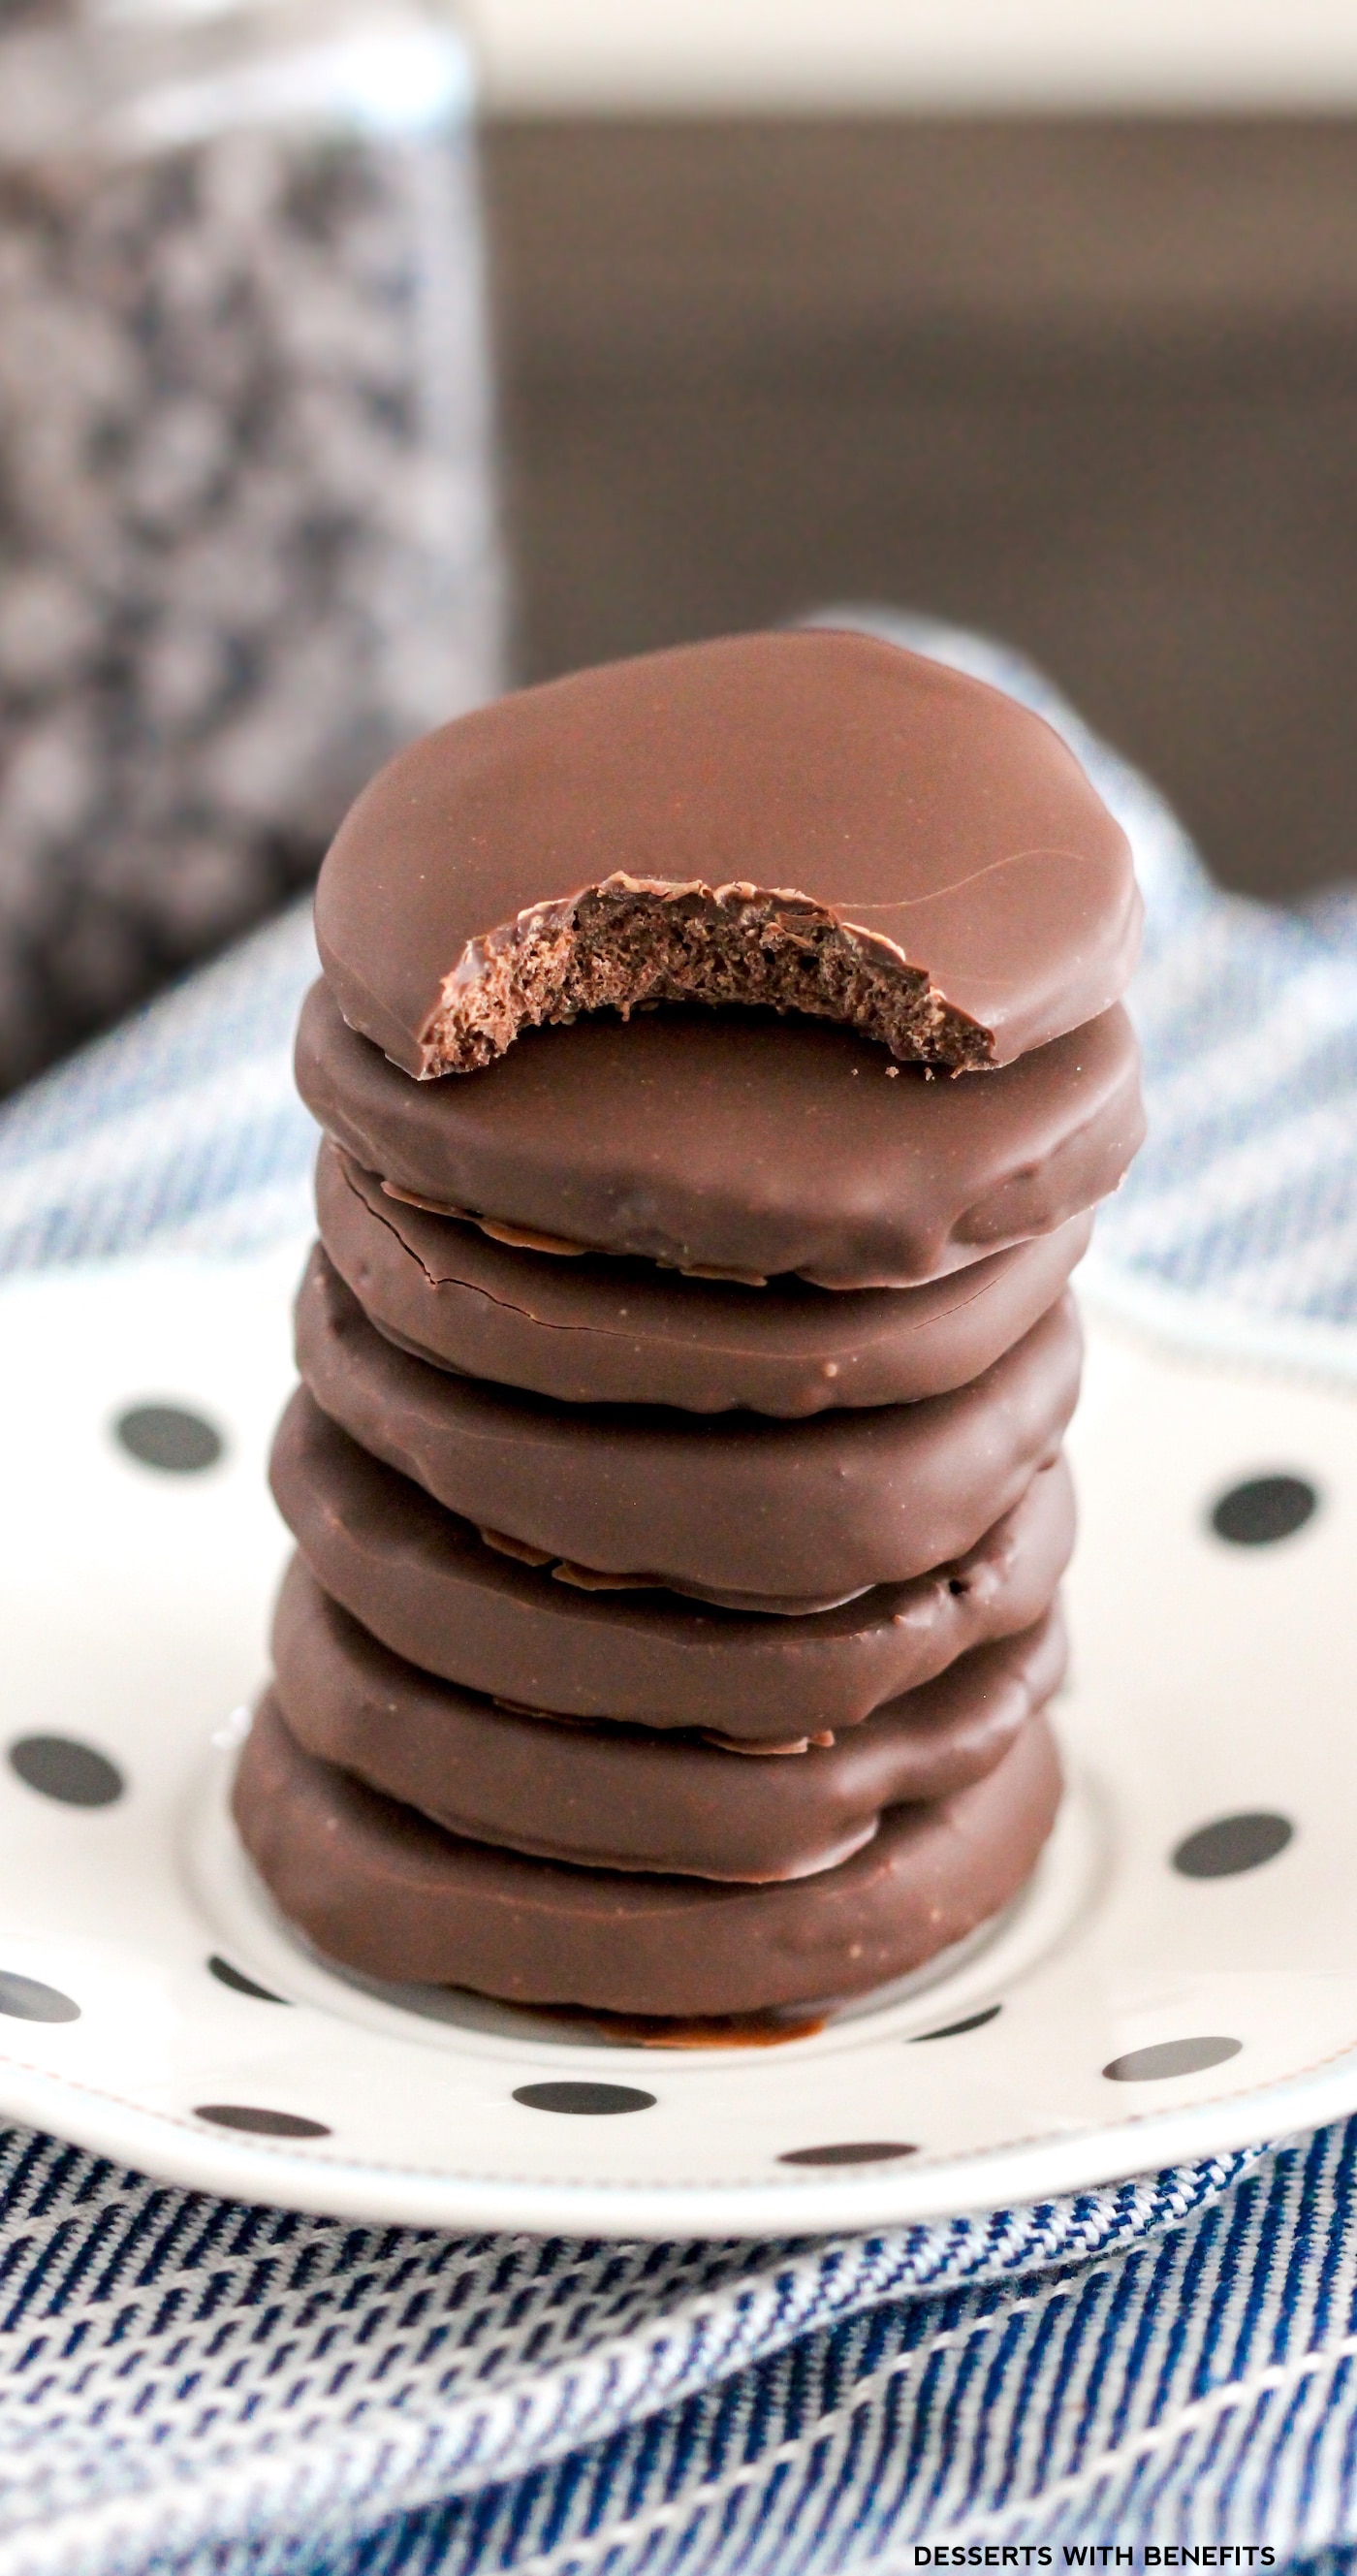 Girl Scout cookies are here so why not try healthy versions instead? These Homemade Thin Mints are better for you, yet taste just like the original! (all natural, refined sugar free, gluten free, vegan) - Healthy Dessert Recipes at the Desserts With Benefits Blog